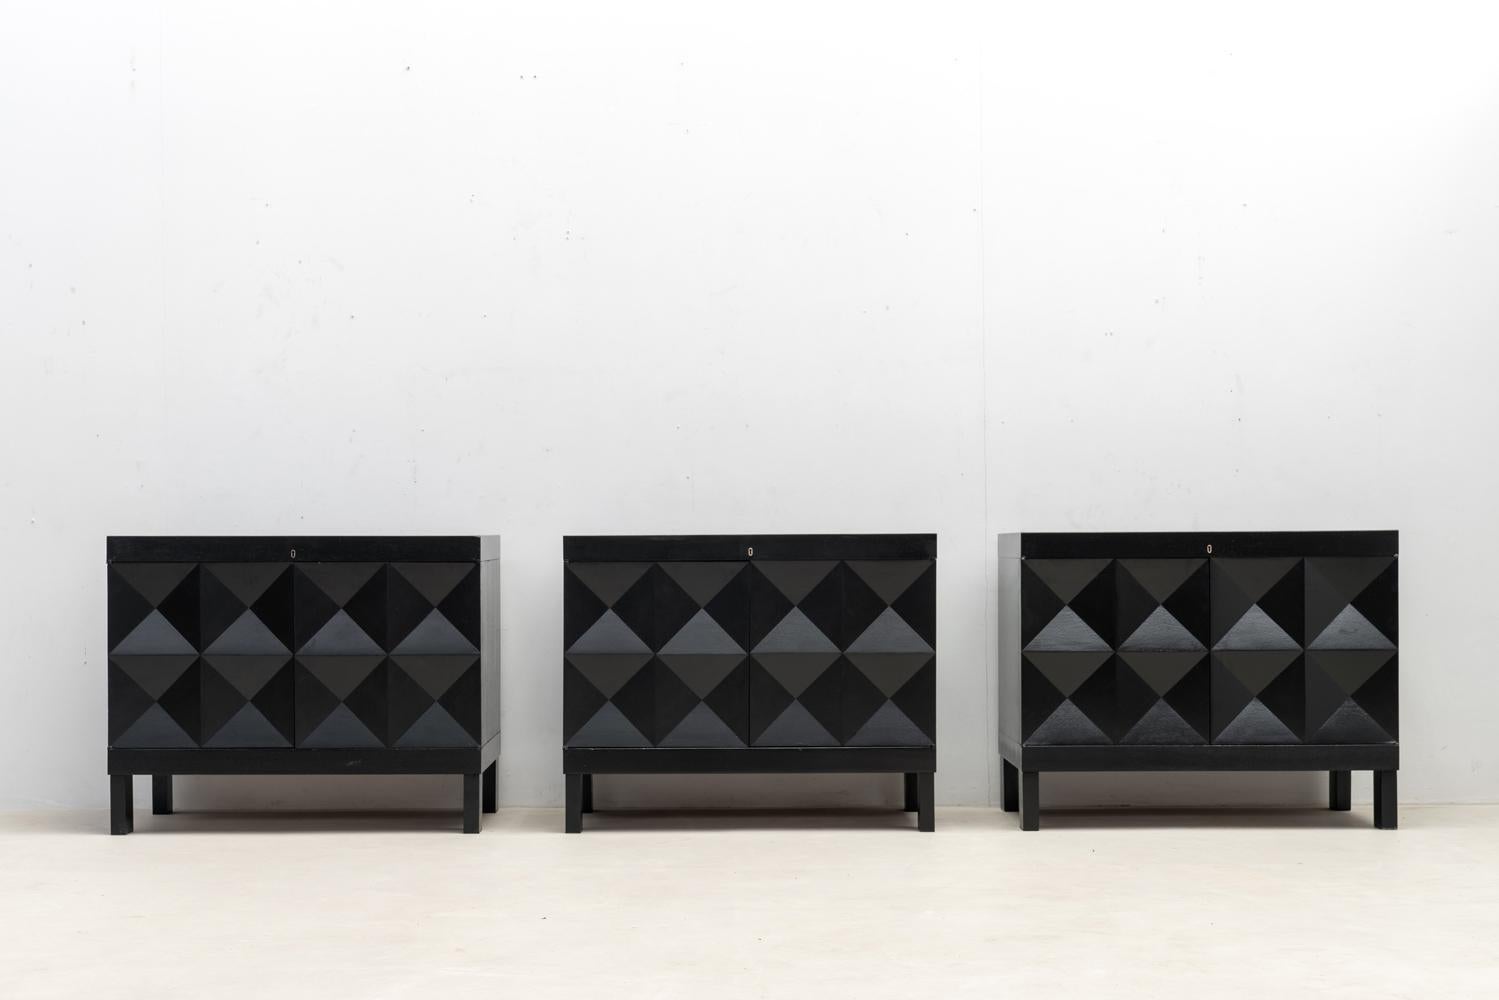 Here's a beautiful set of graphic cabinets created in Belgium in the late '60s. These black-stained oak cabinets feature doors decorated with a geometric motif, adding depth to the design.

Inside, numerous storage spaces are organized by shelves.